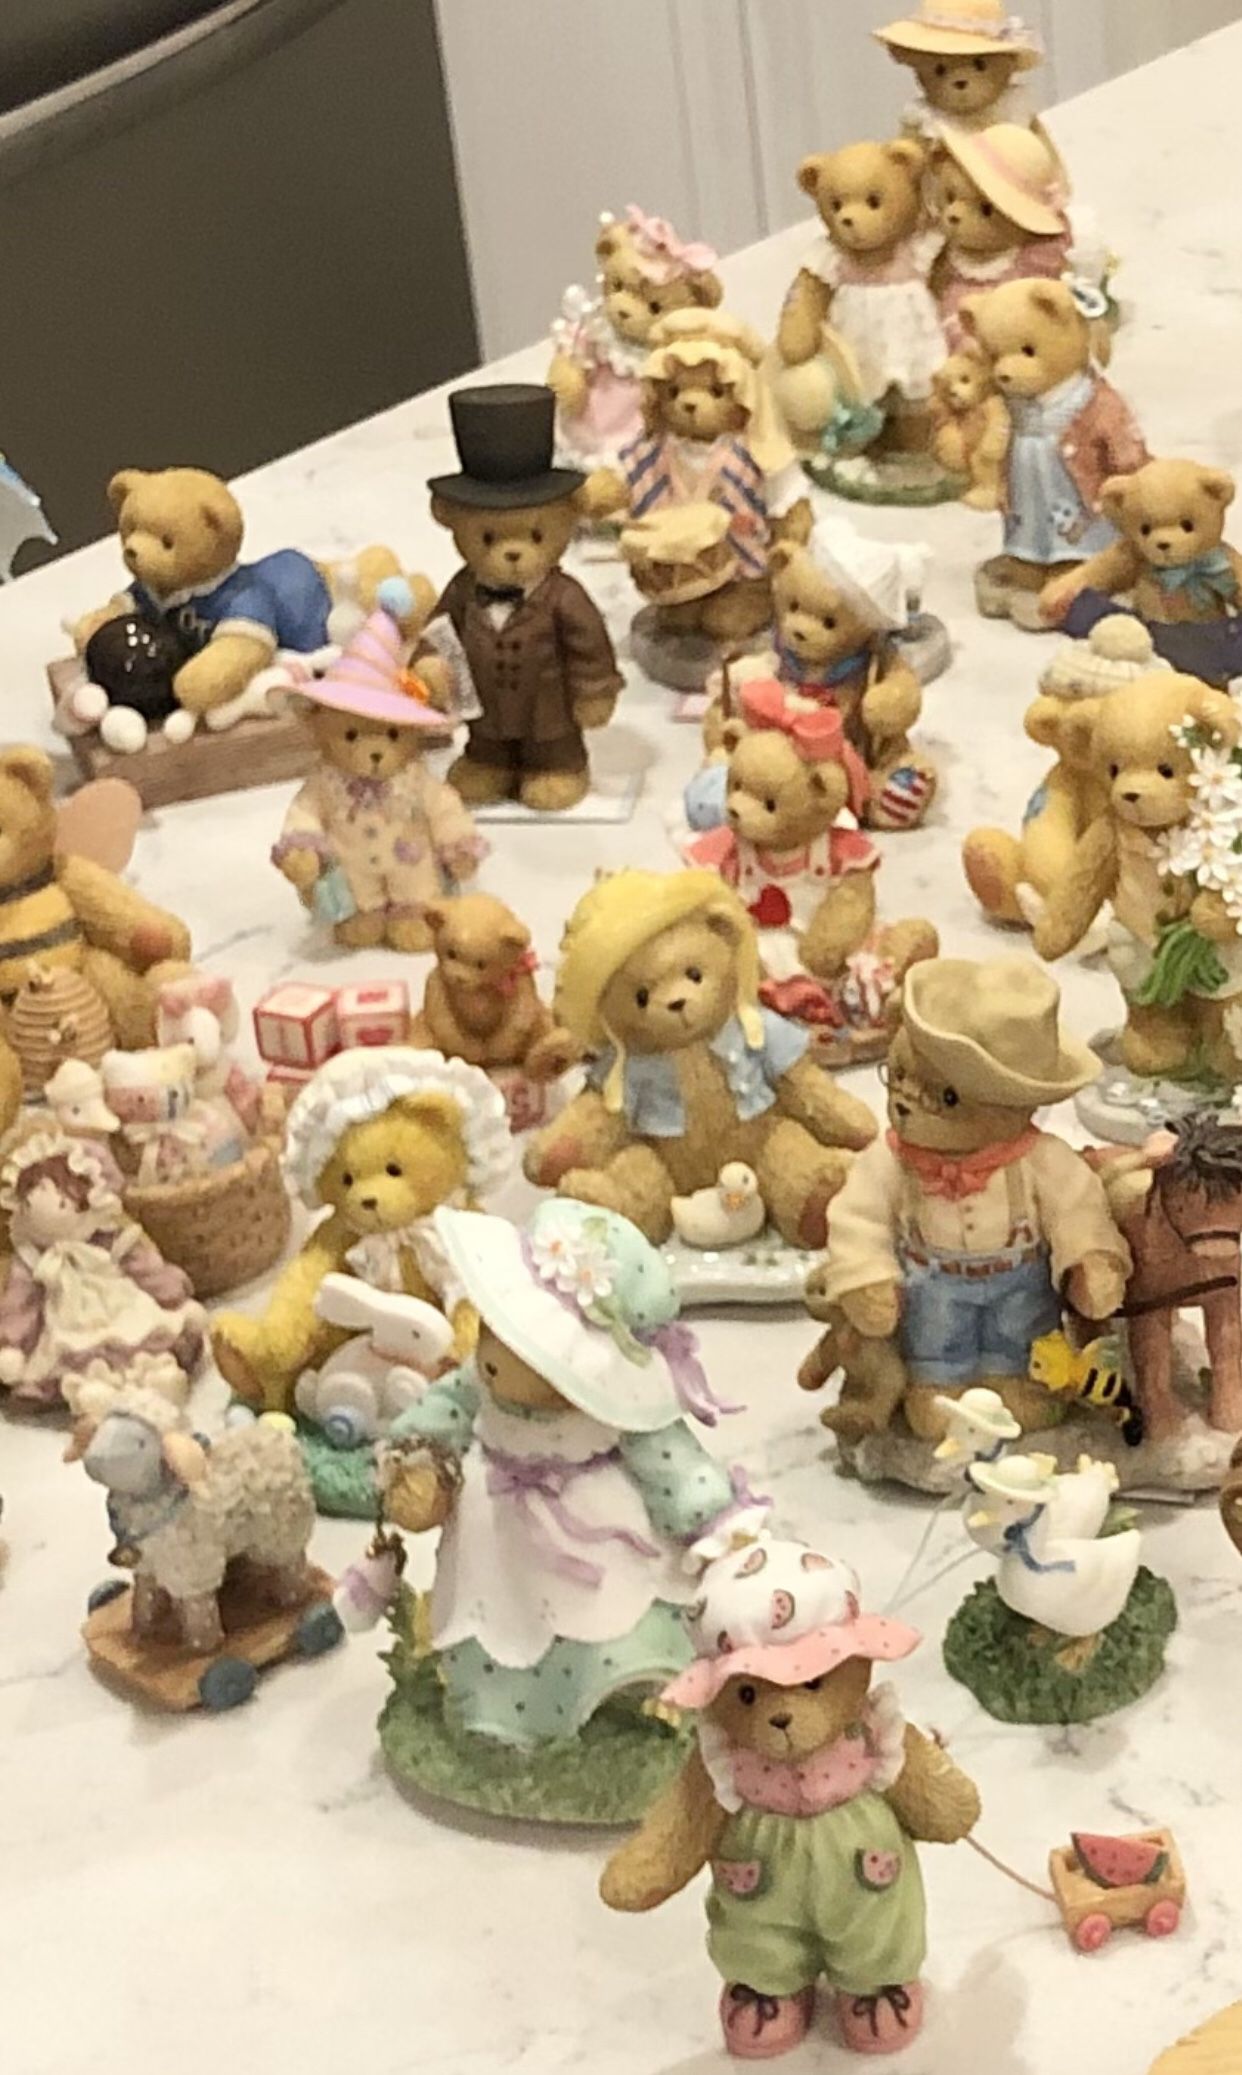 Large Cherished Teddie's collection.  Over 75 pieces!  Boyd’s Bears Too!